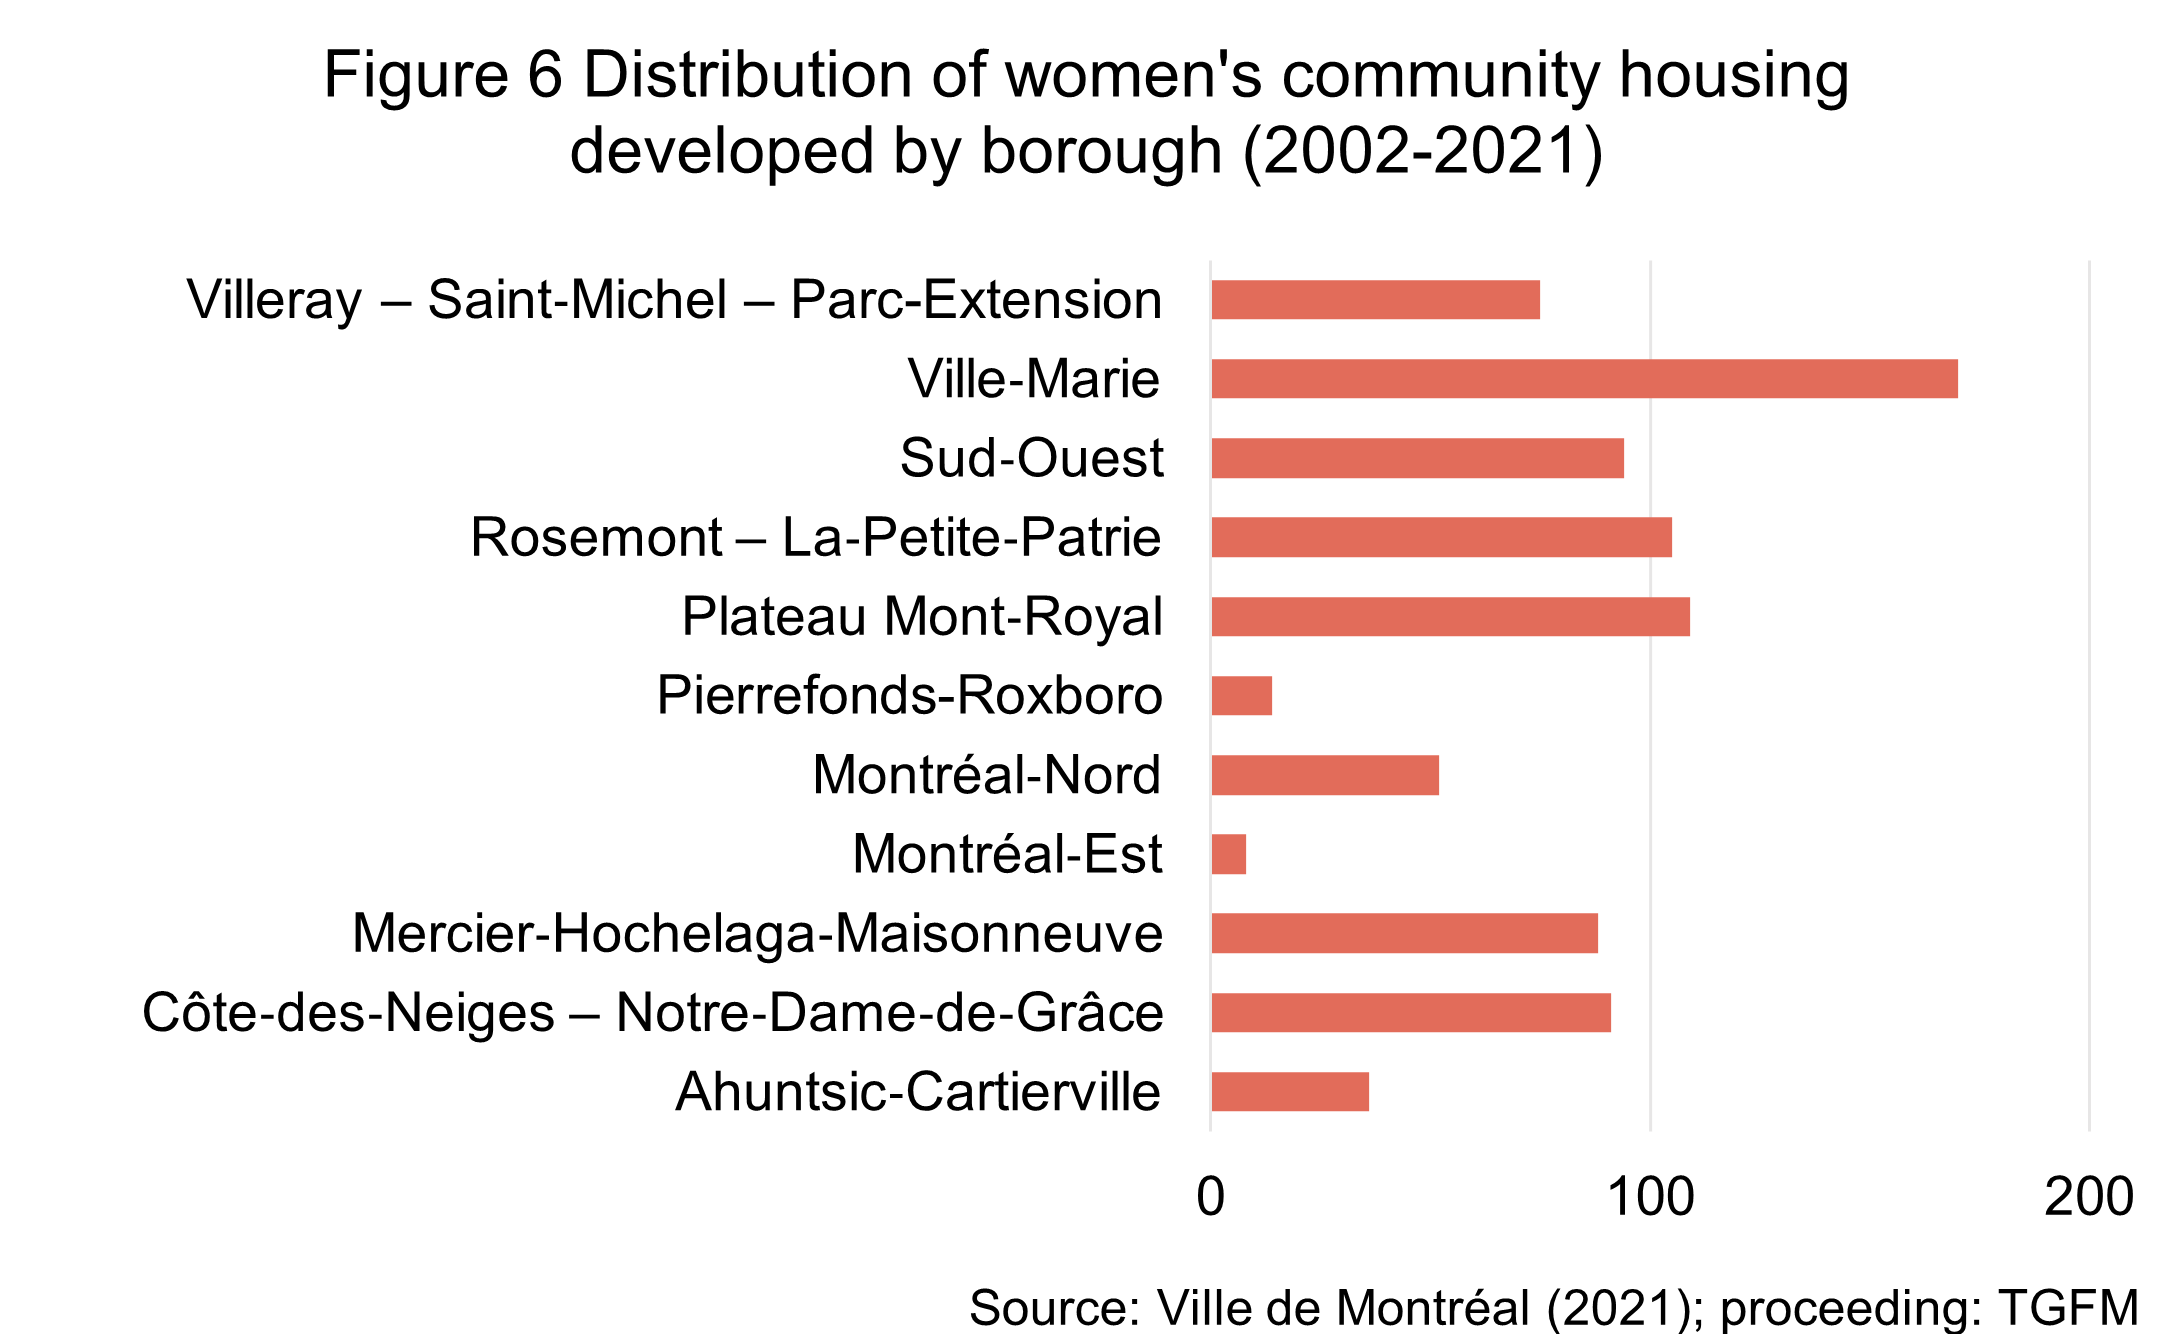 The figure illustrates that new community housing for women is concentrated in the following boroughs: Plateau Mont-Royal, Rosemont - La-Petite-Patrie, Sud-Ouest and Ville-Marie